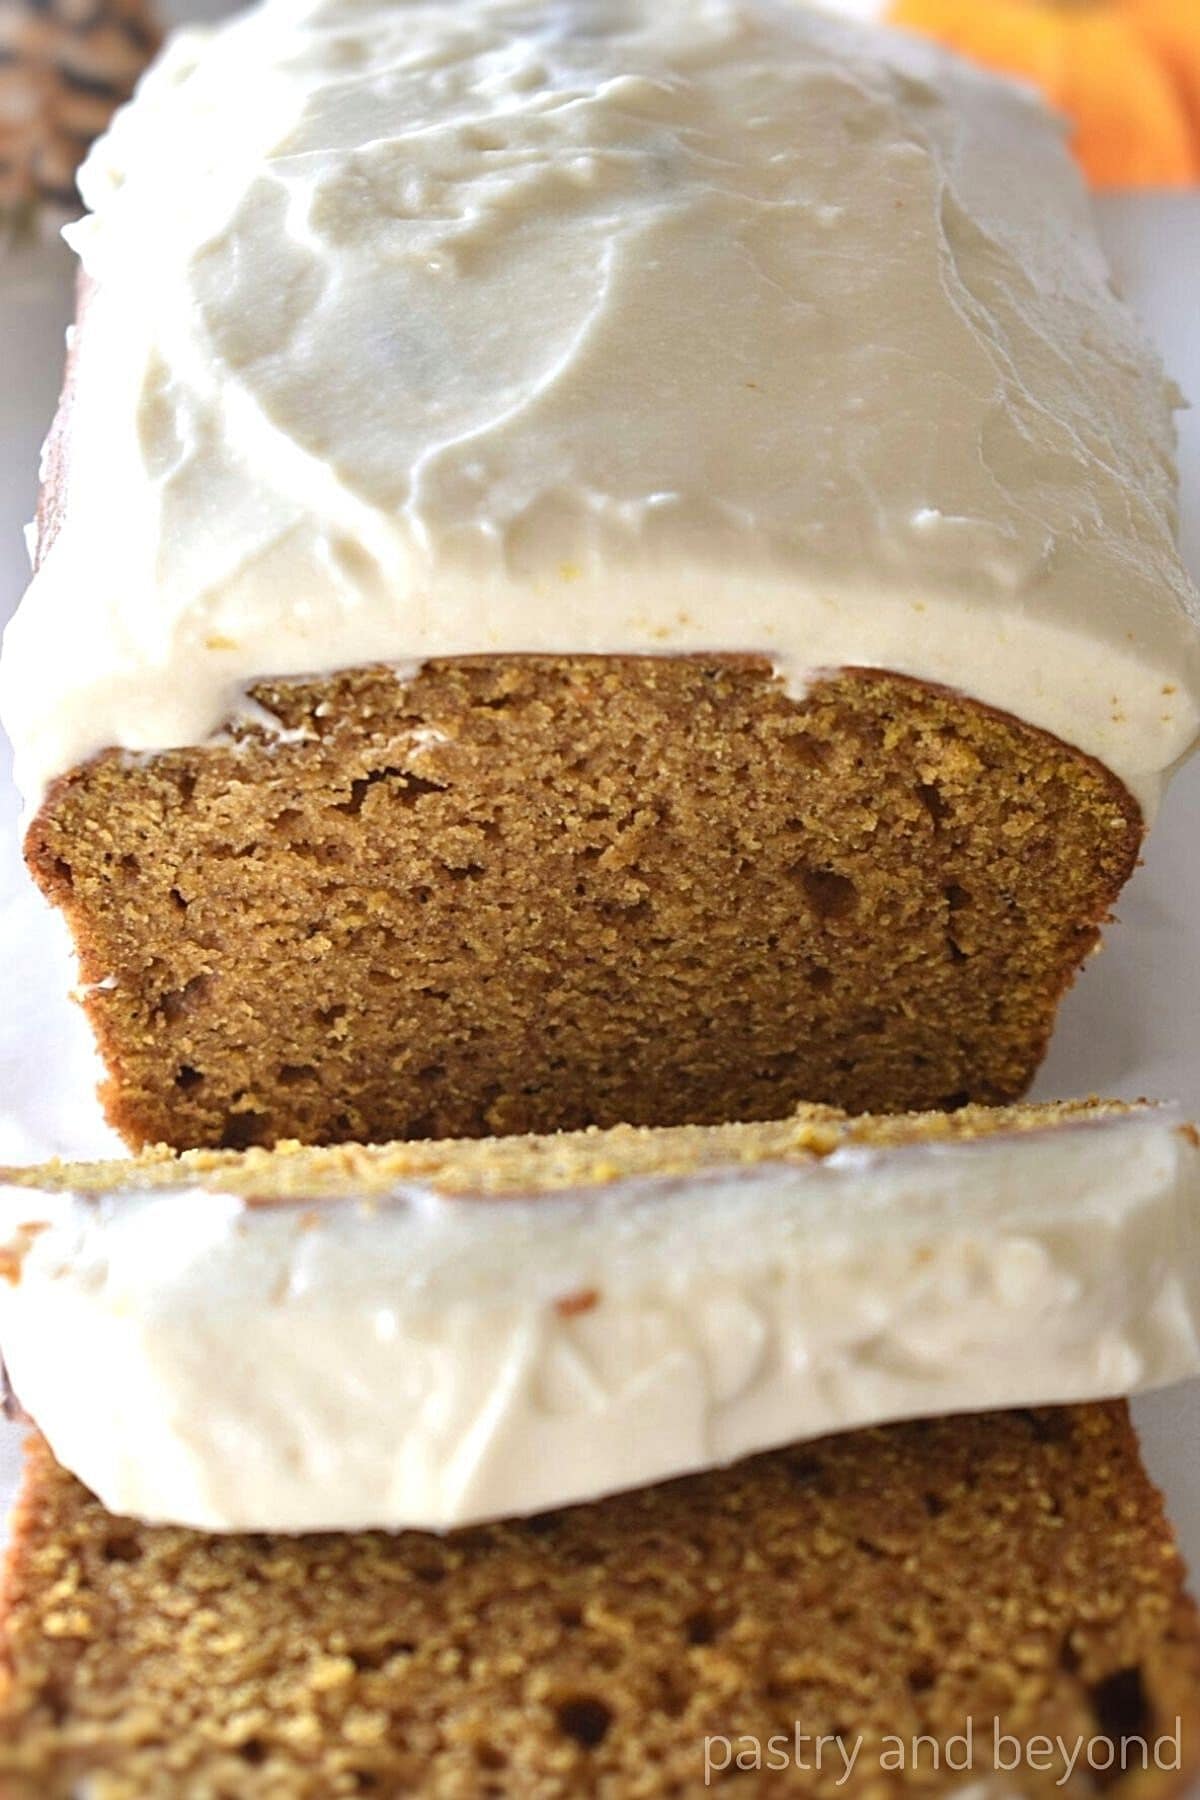 Cream cheese frosted pumpkin loaf with slices.